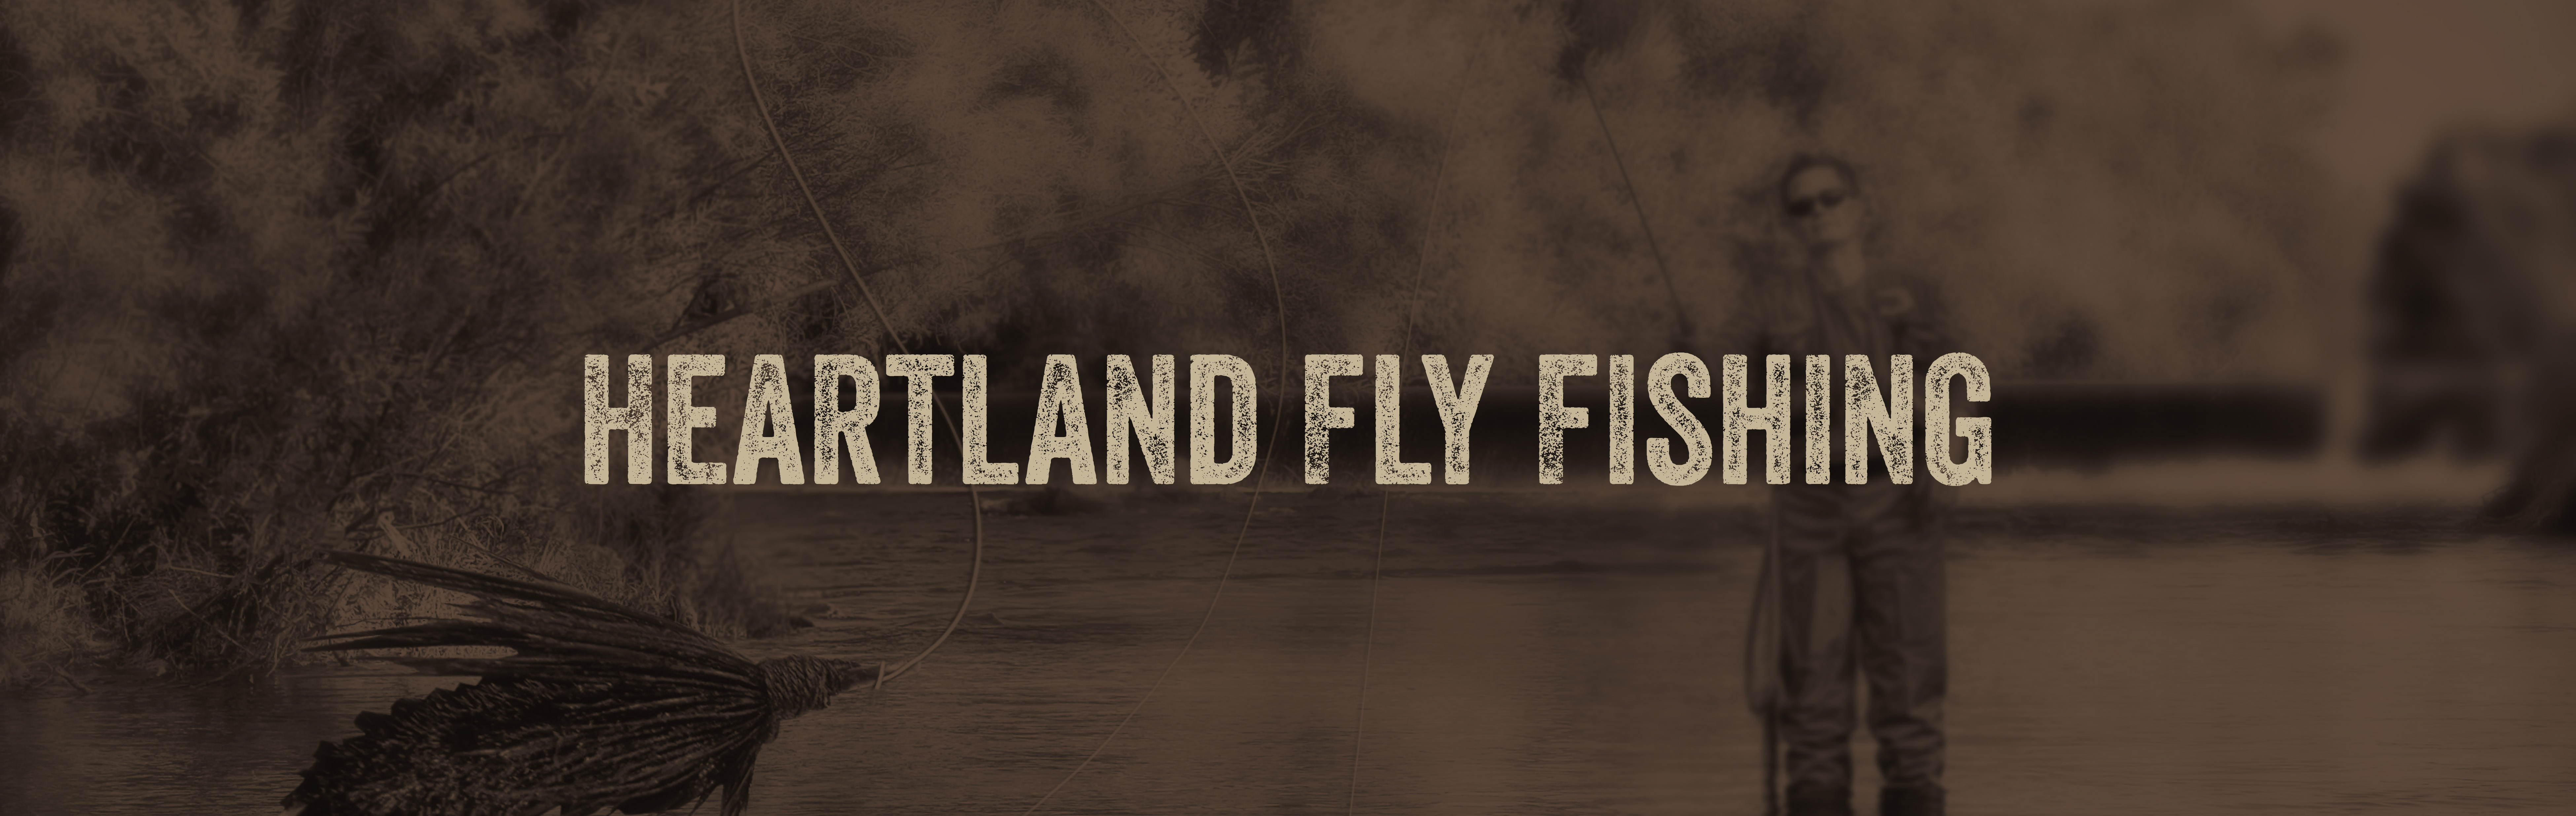 Heartland Flyfishing Festival Just another WordPress site